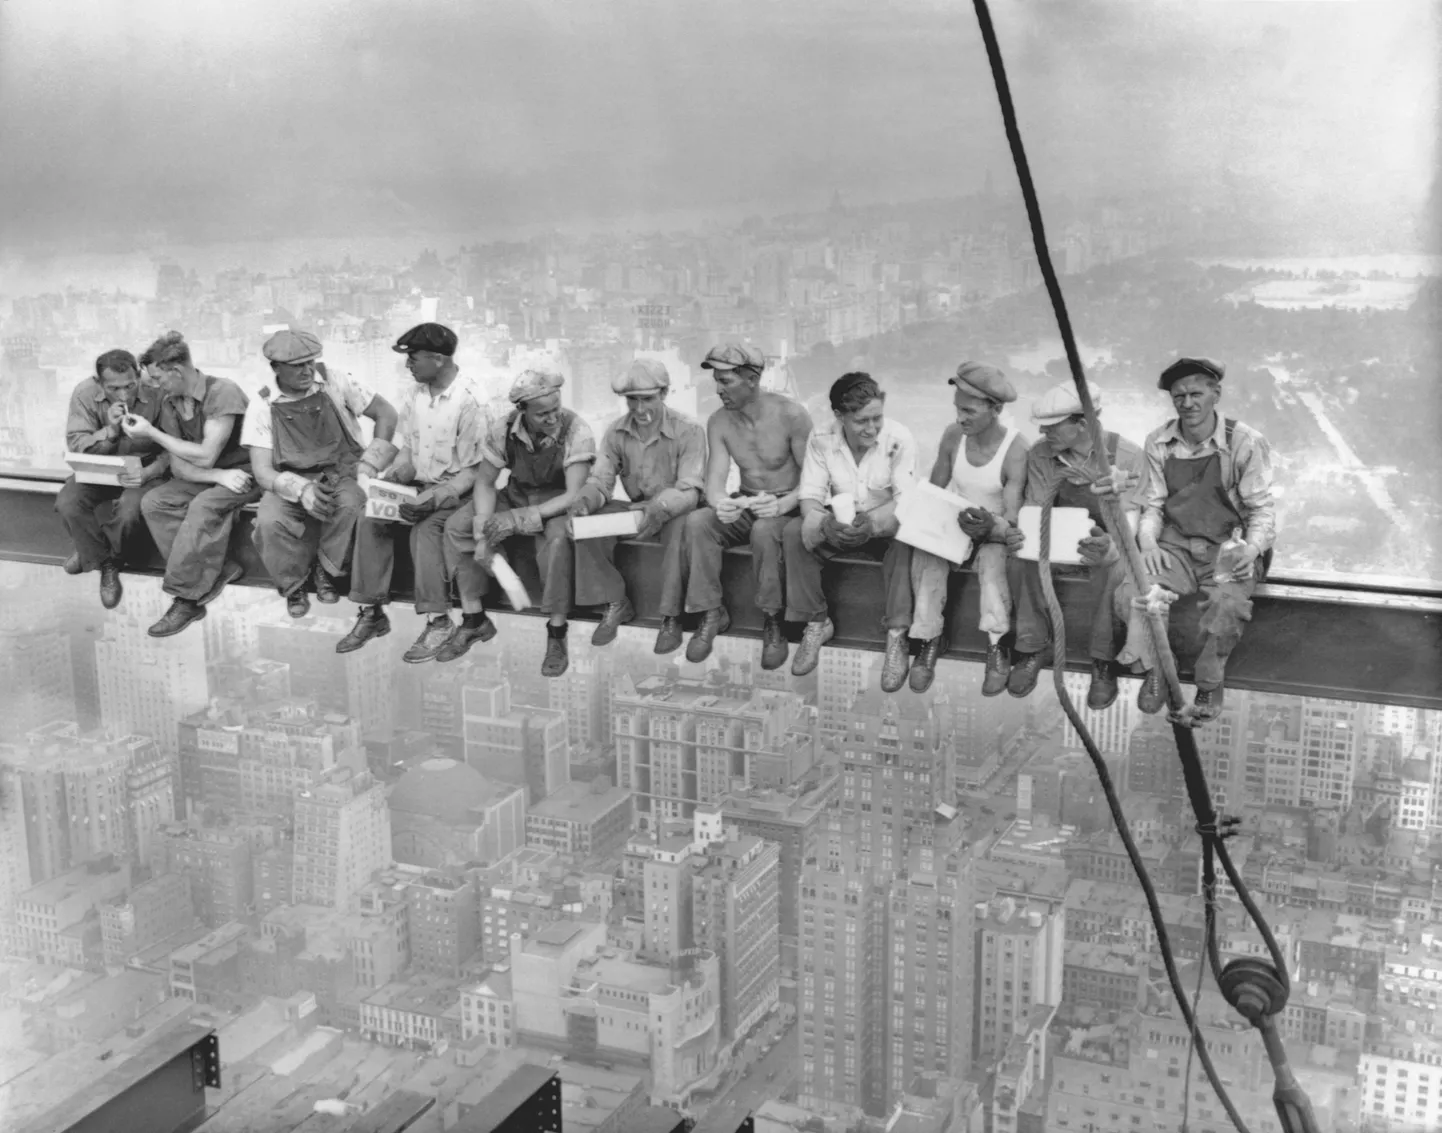 Construction workers eat their lunch atop a steel beam 800 feet above the ground, at the construction site for the RCA Building at the Rockefeller Center, in New York in this handout photo dated September 20, 1932. The historic image "Lunch atop a Skyscraper" was taken 80 years ago. REUTERS/Corbis/Handout (UNITED STATES - Tags: CITYSPACE BUSINESS CONSTRUCTION REAL ESTATE SOCIETY) NO SALES. NO ARCHIVES. FOR EDITORIAL USE ONLY. NOT FOR SALE FOR MARKETING OR ADVERTISING CAMPAIGNS. THIS IMAGE HAS BEEN SUPPLIED BY A THIRD PARTY. IT IS DISTRIBUTED, EXACTLY AS RECEIVED BY REUTERS, AS A SERVICE TO CLIENTS. MANDATORY CREDIT